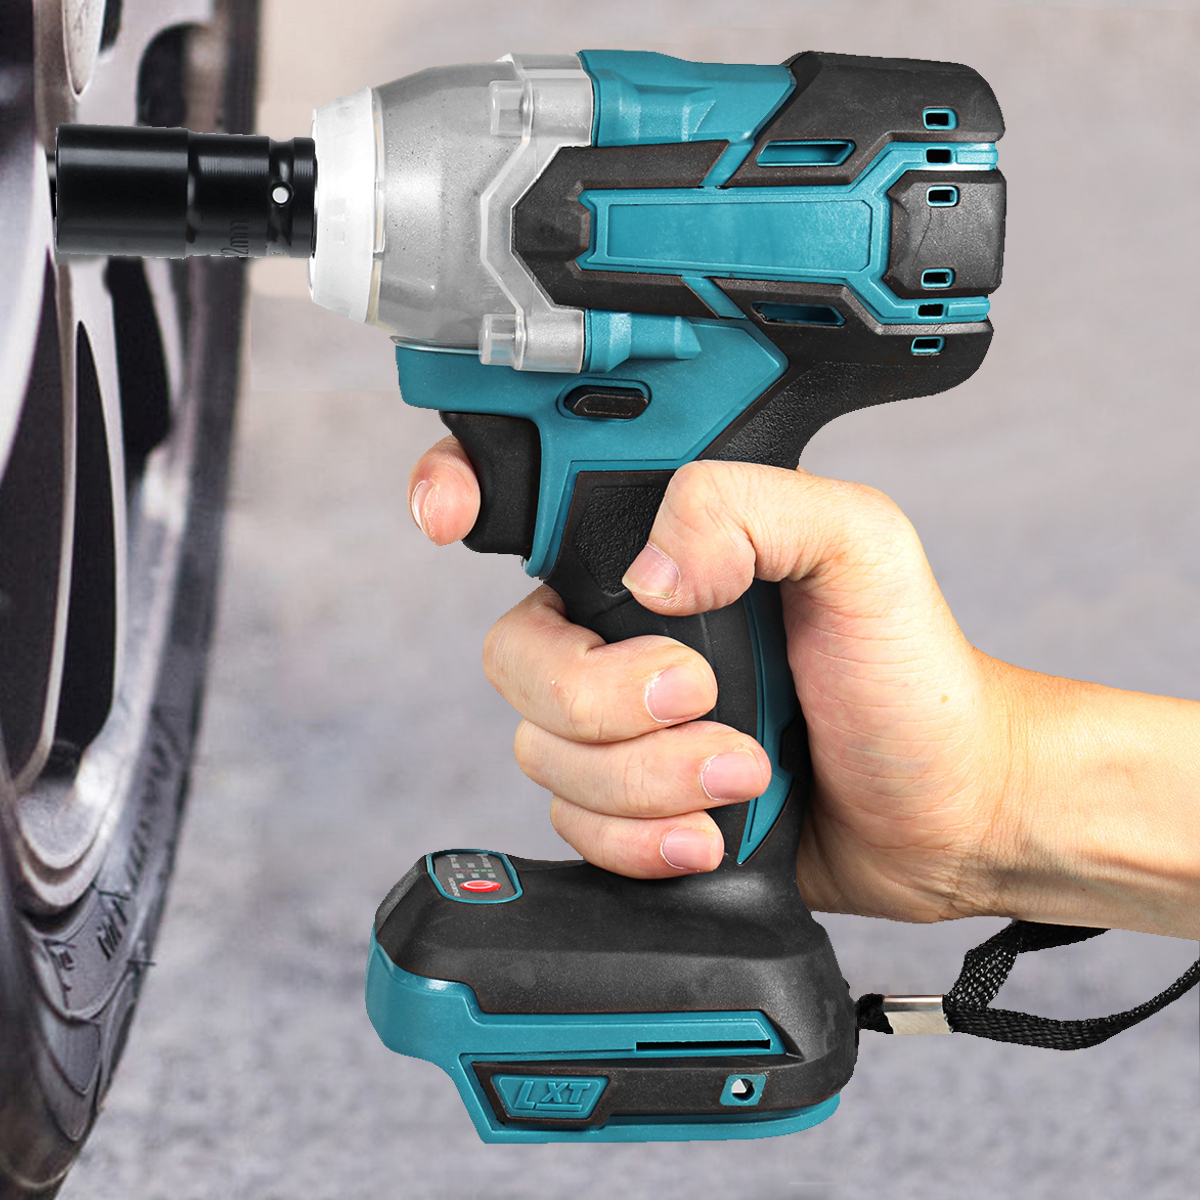 588Nm-Cordless-Brushless-Wrench12-Impact-Wrench-Driver-Replacement-for-Makita-18V-Battery-1856002-4